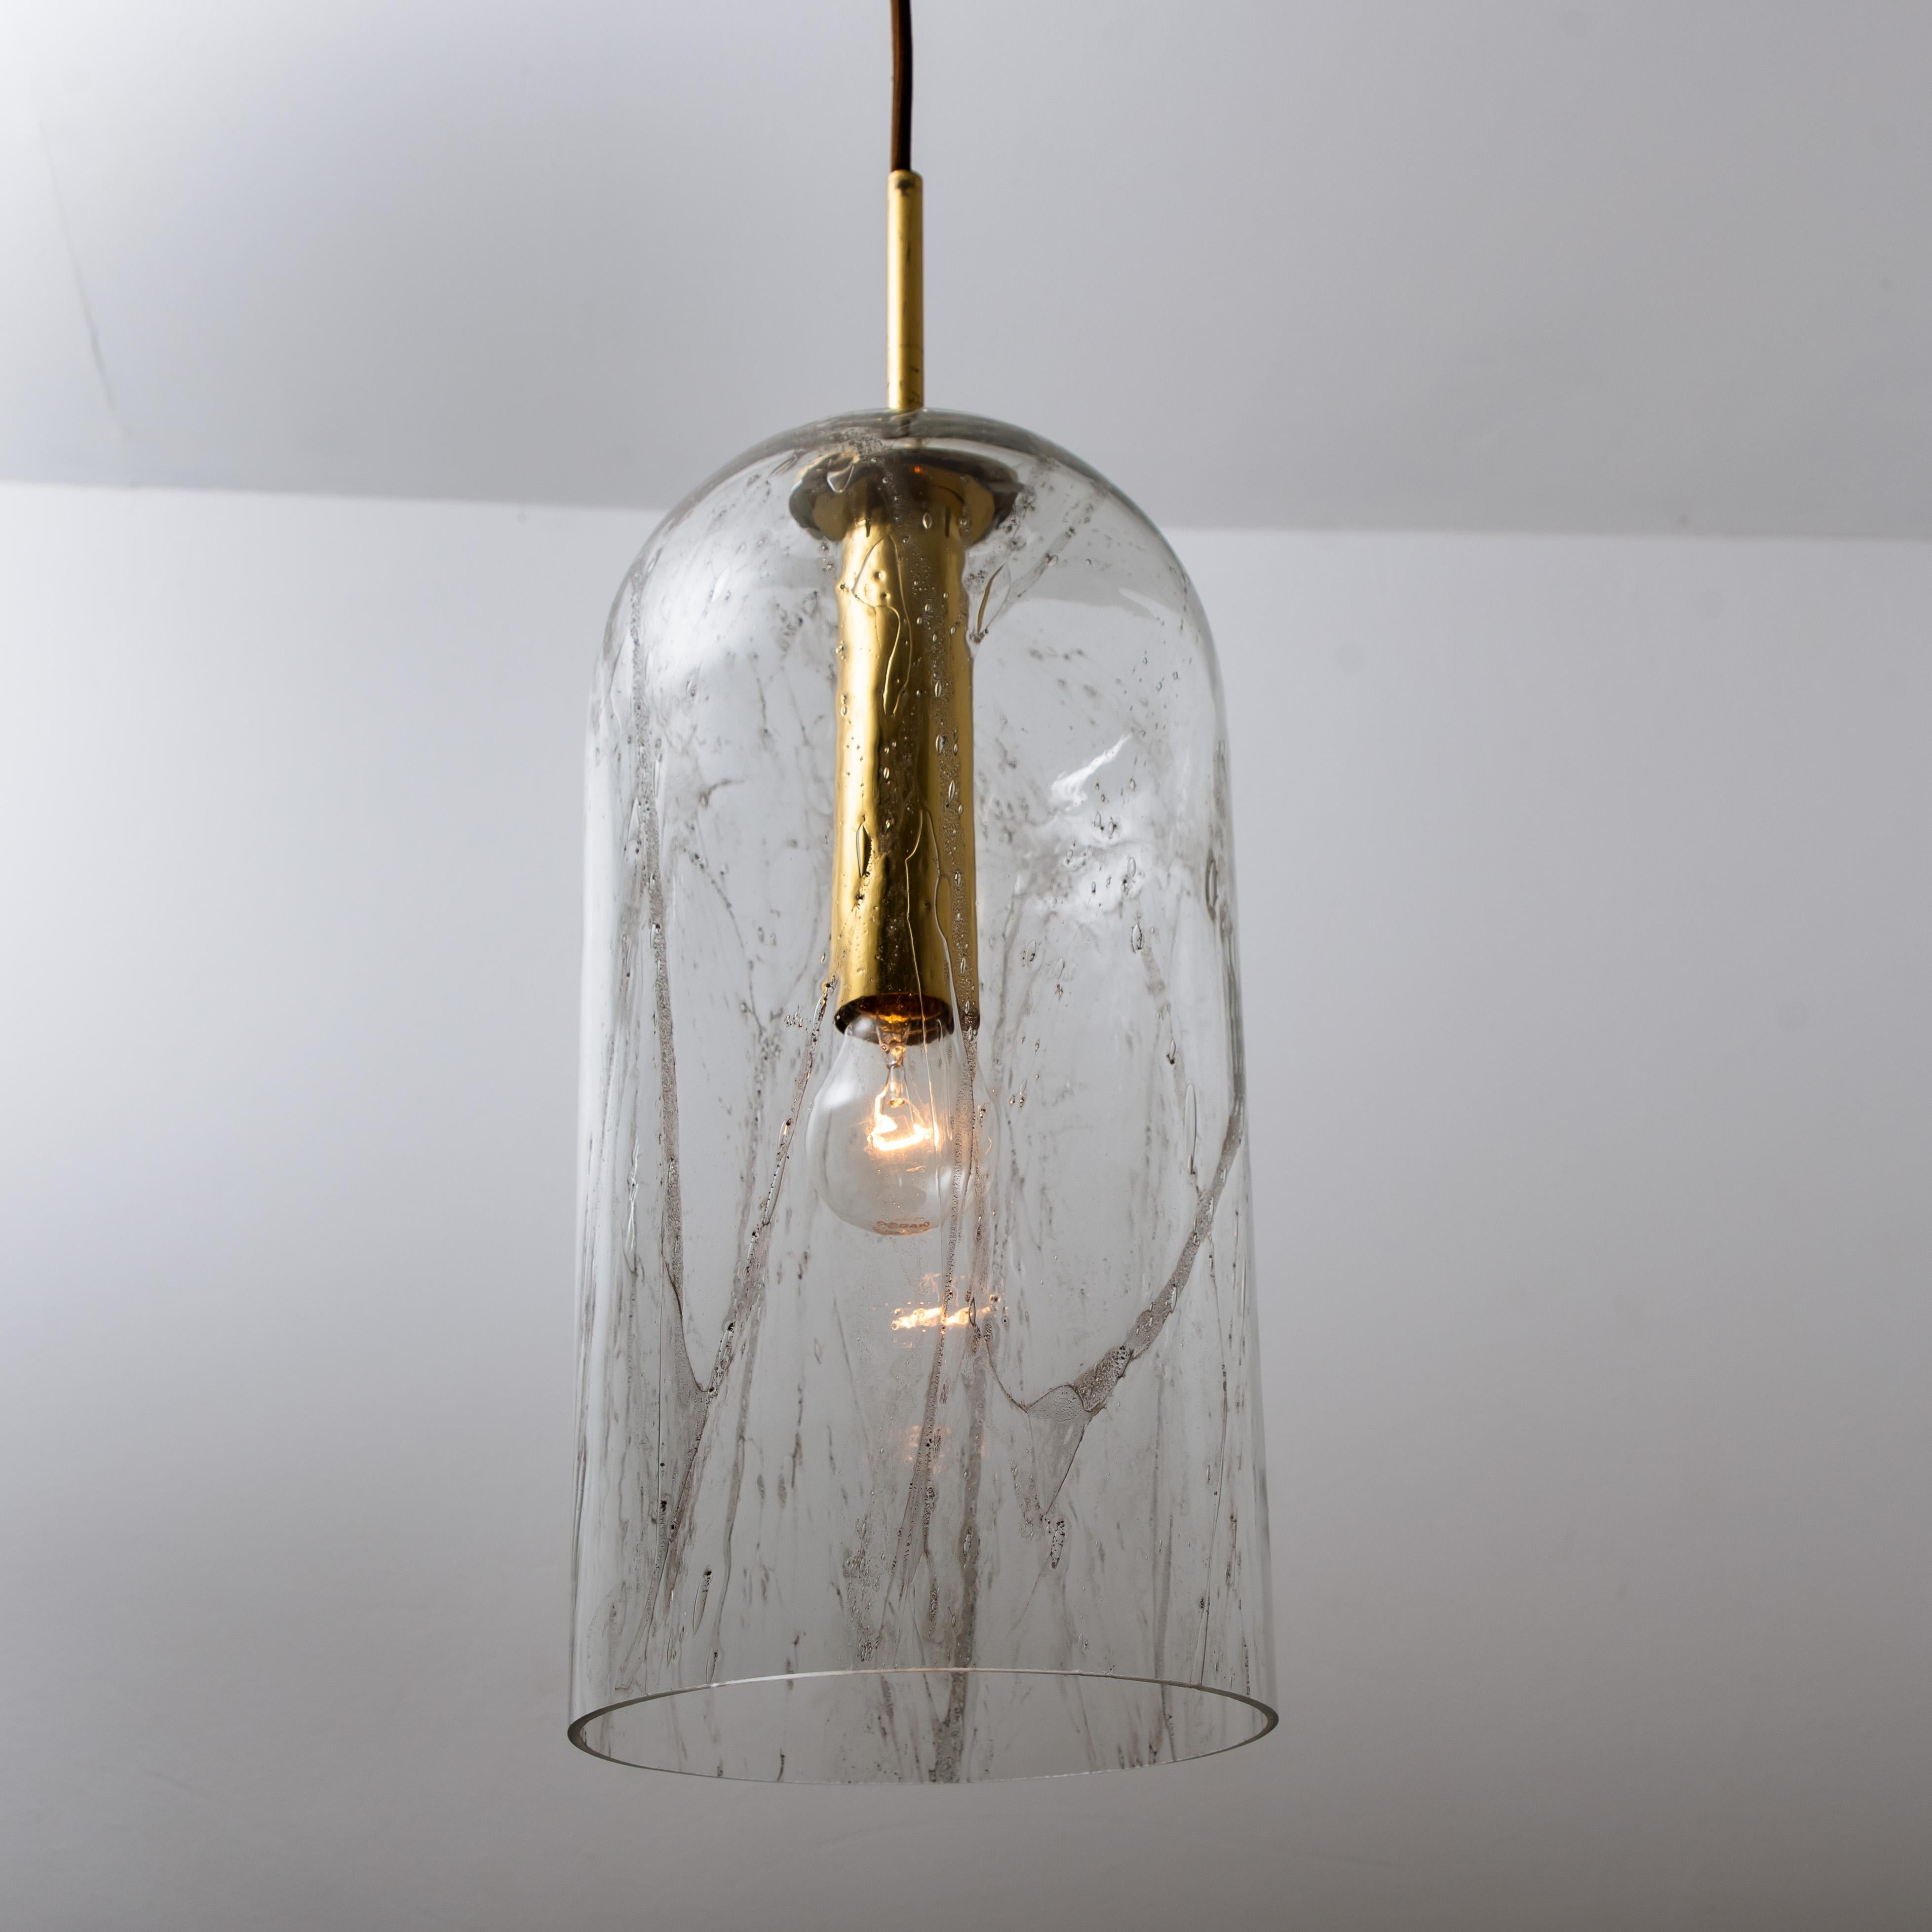 1 of the 3 Glass Pendant Lamps by Doria, 1960 For Sale 3